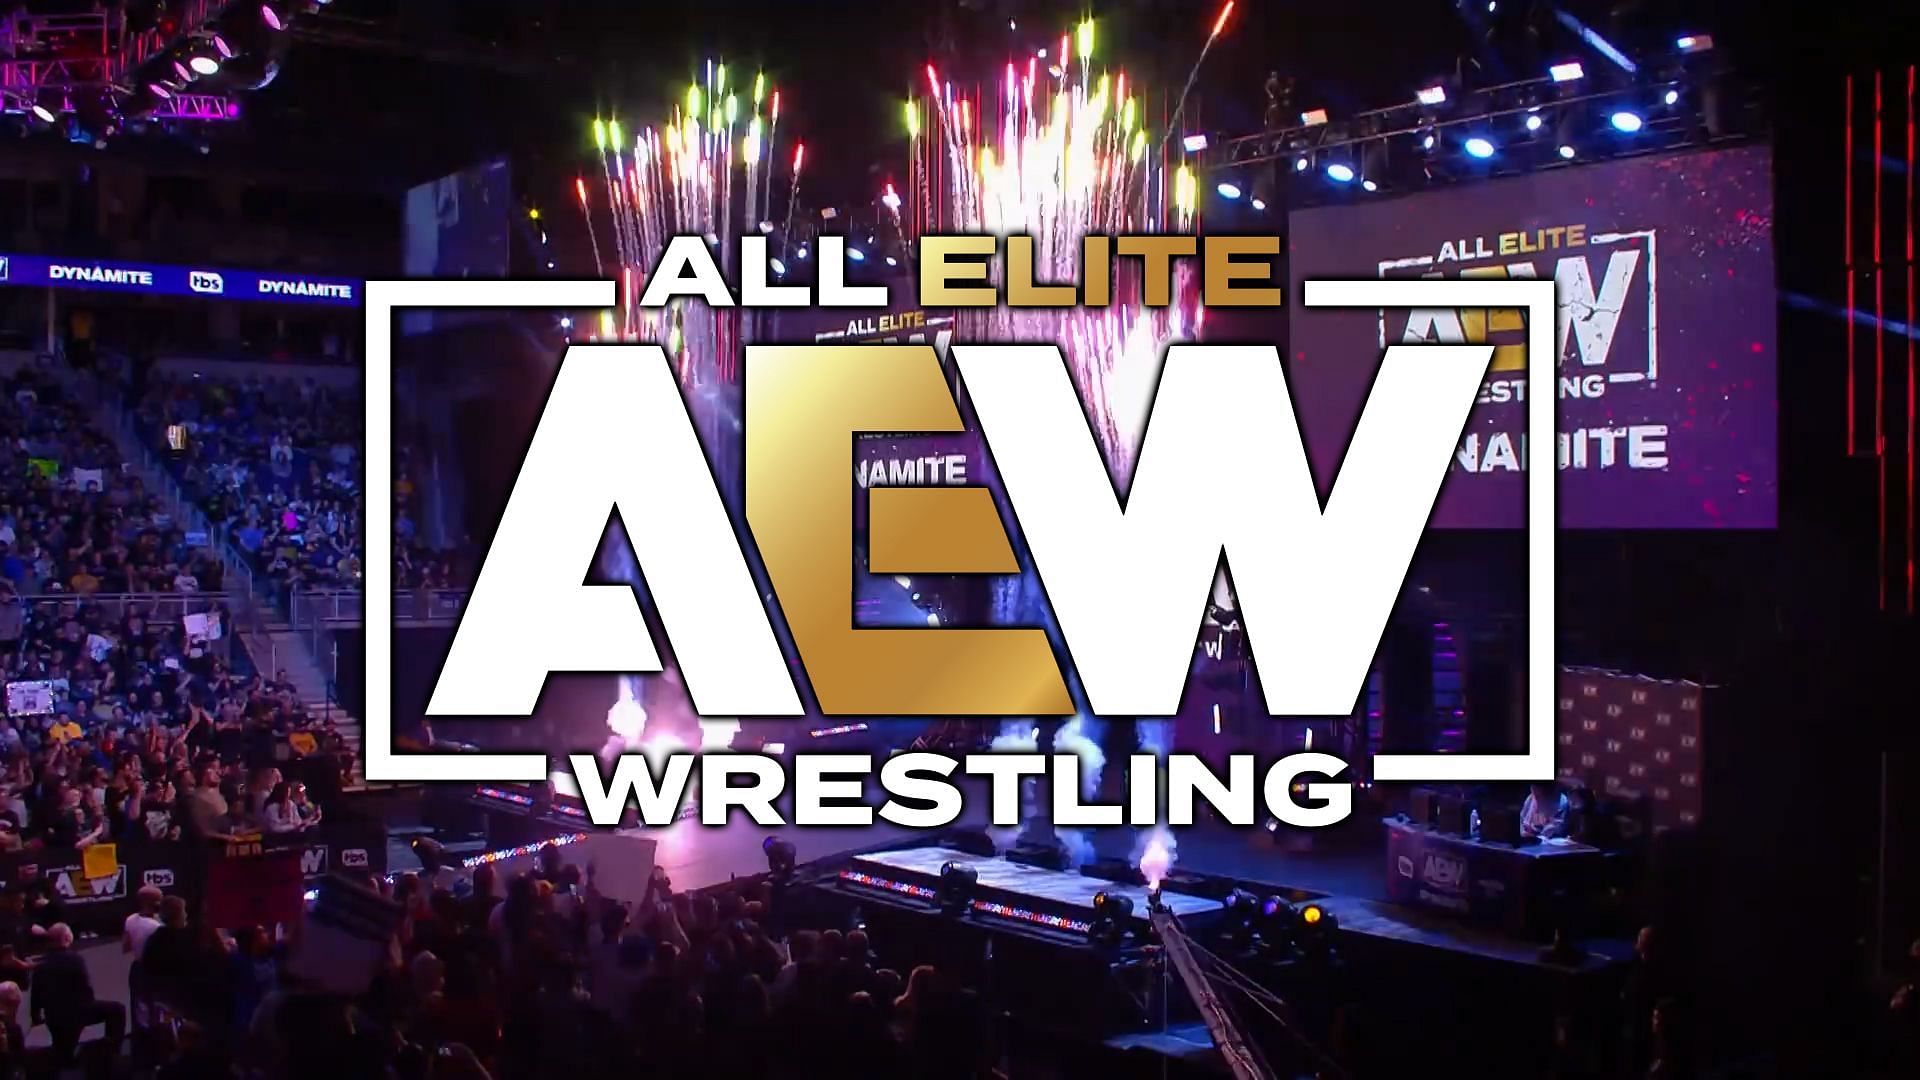 AEW is seeing an uptick in live attendance (image credit: All Elite Wrestling on YouTube)